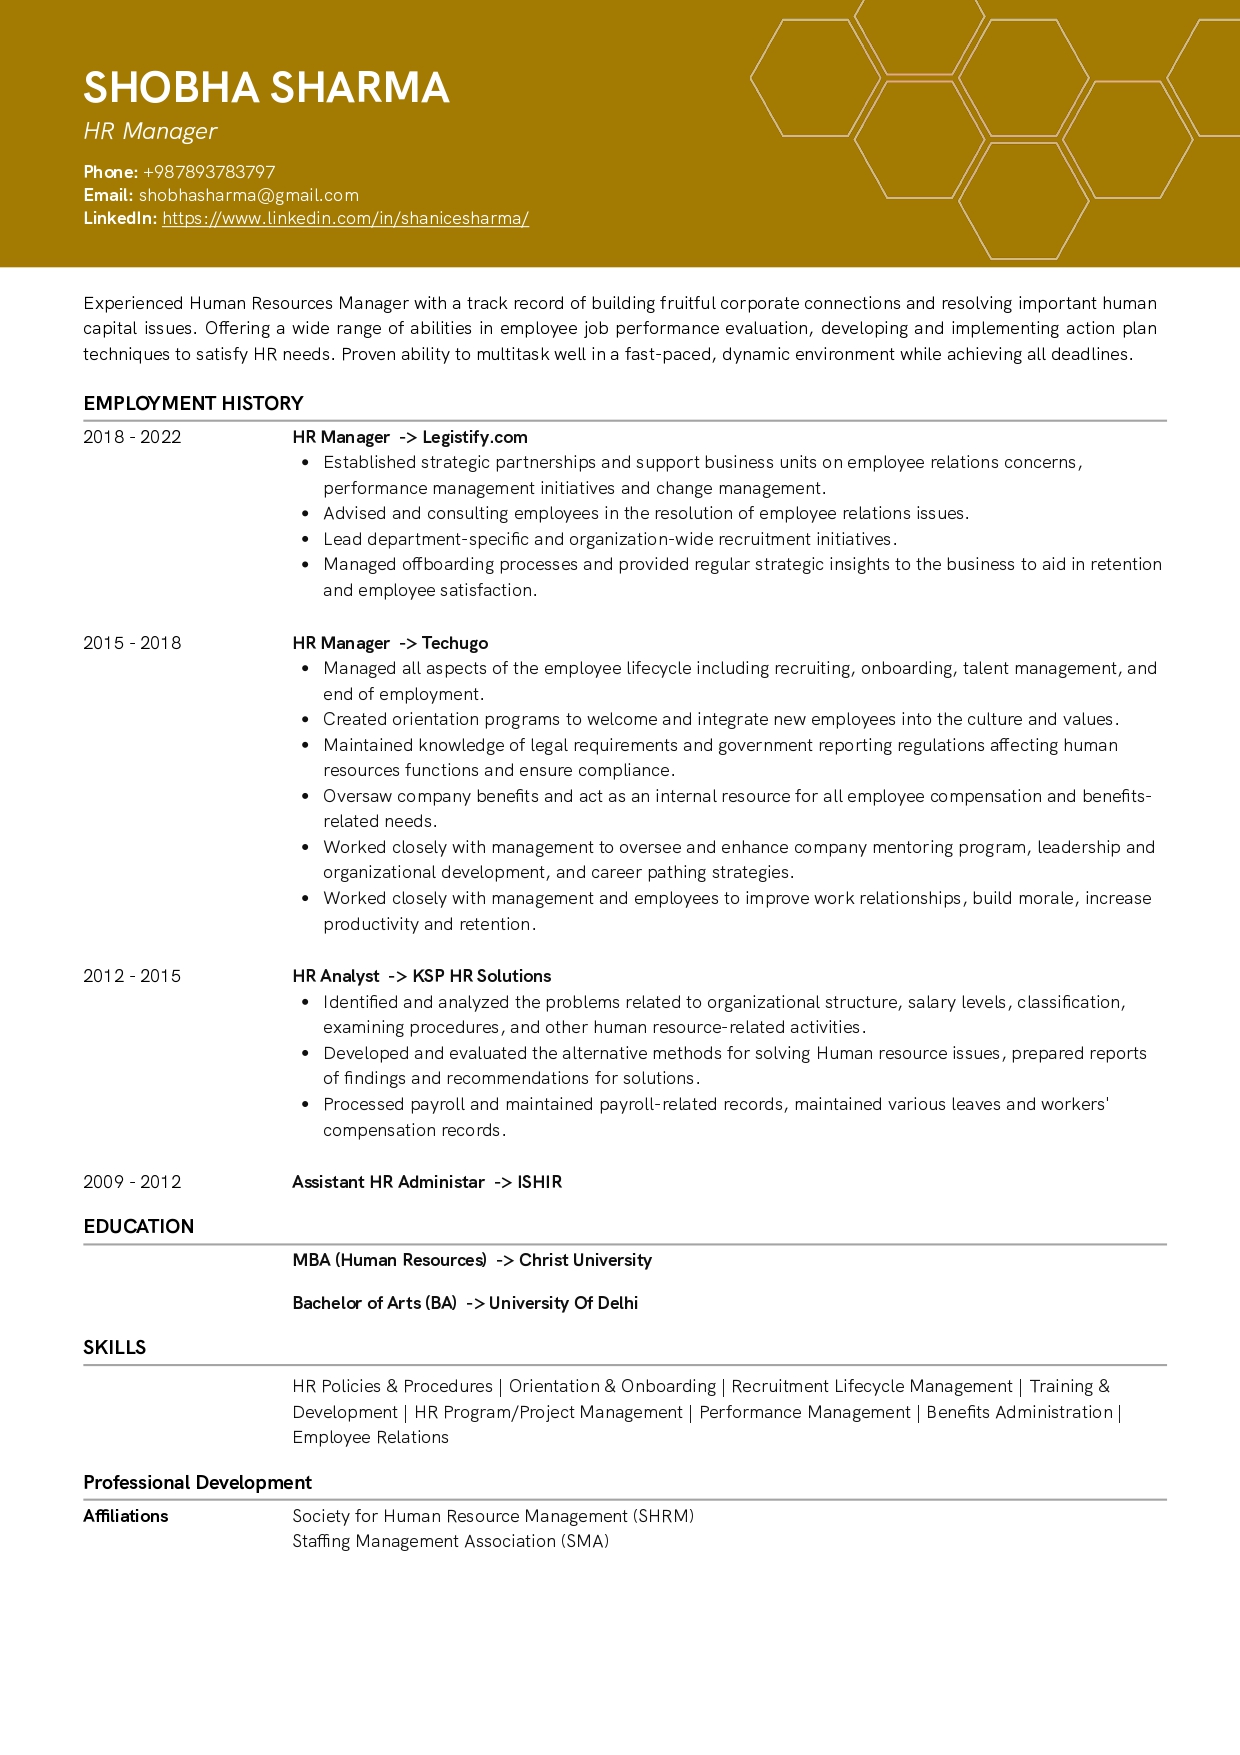 Resume of HR Manager